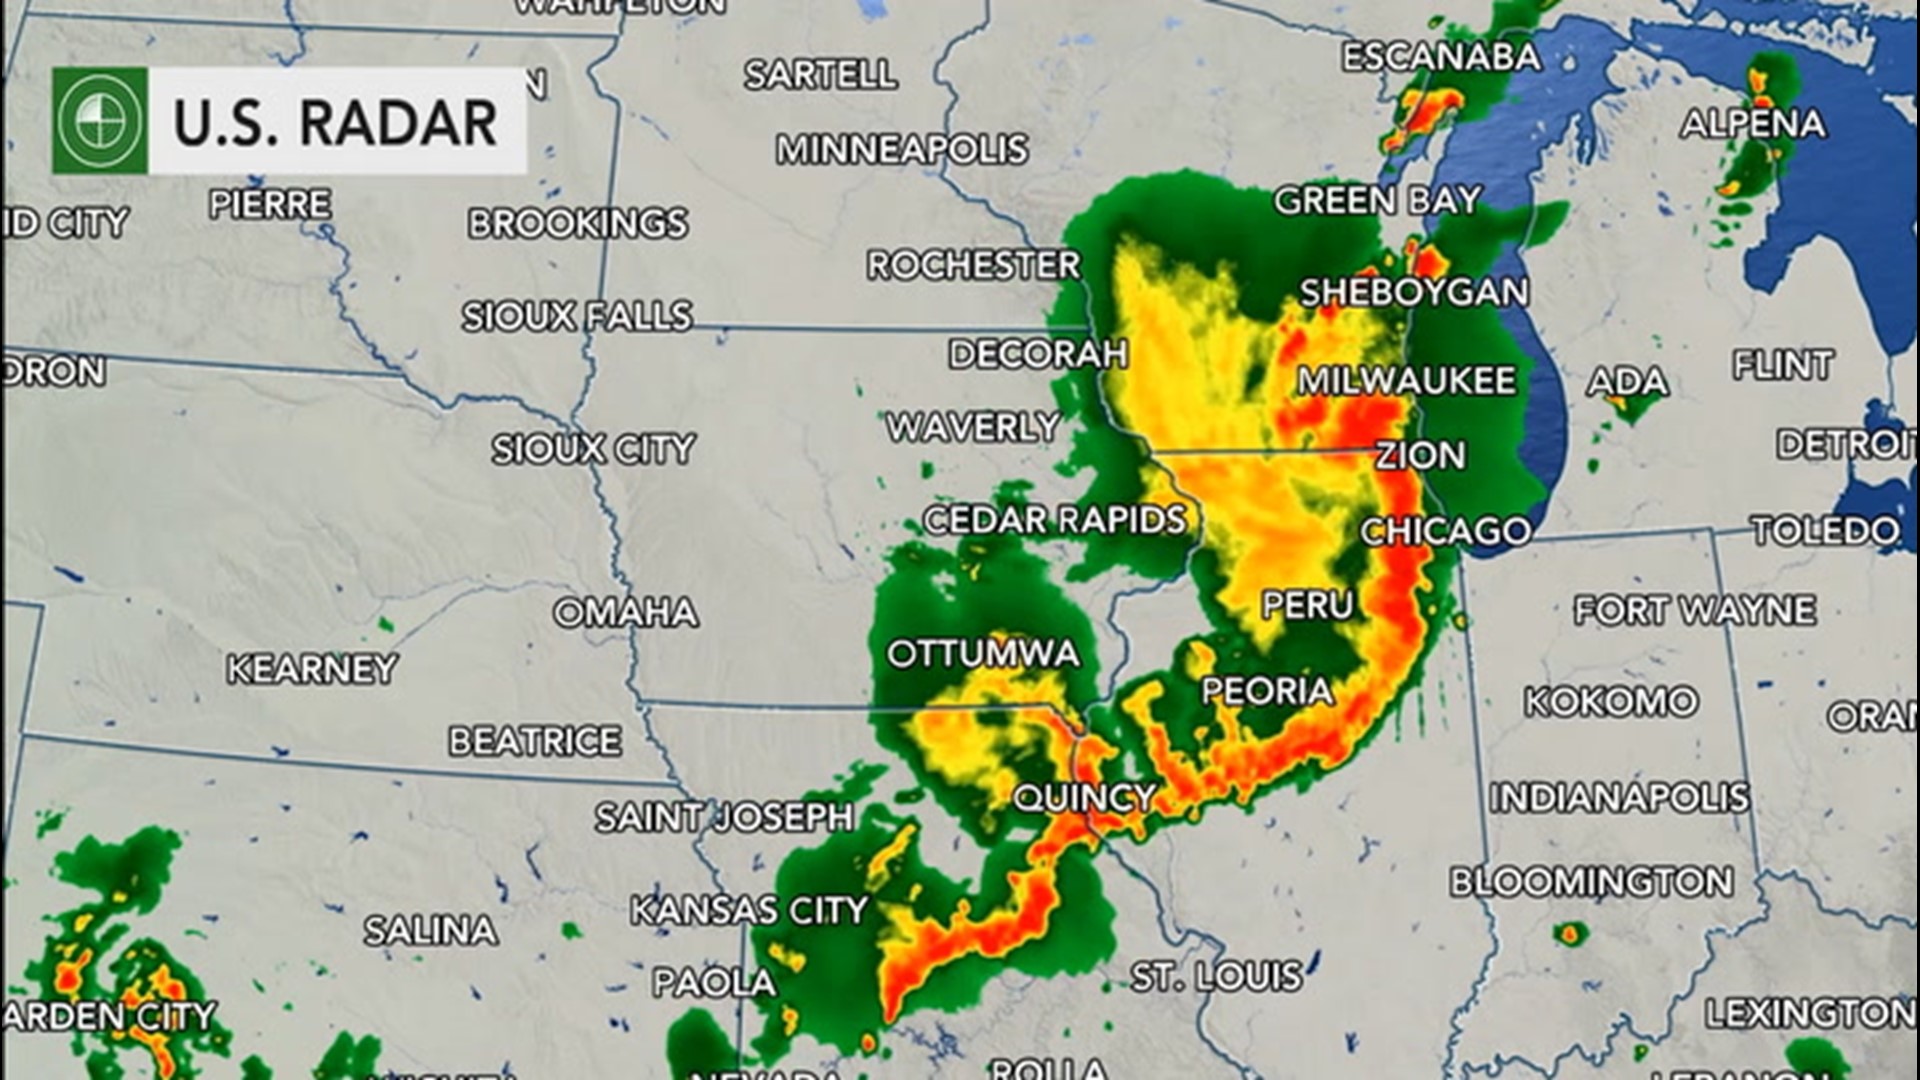 This radar from AccuWeather detects the derecho that swept through Midwest from 9 A.M. to 9 P.M. local time.